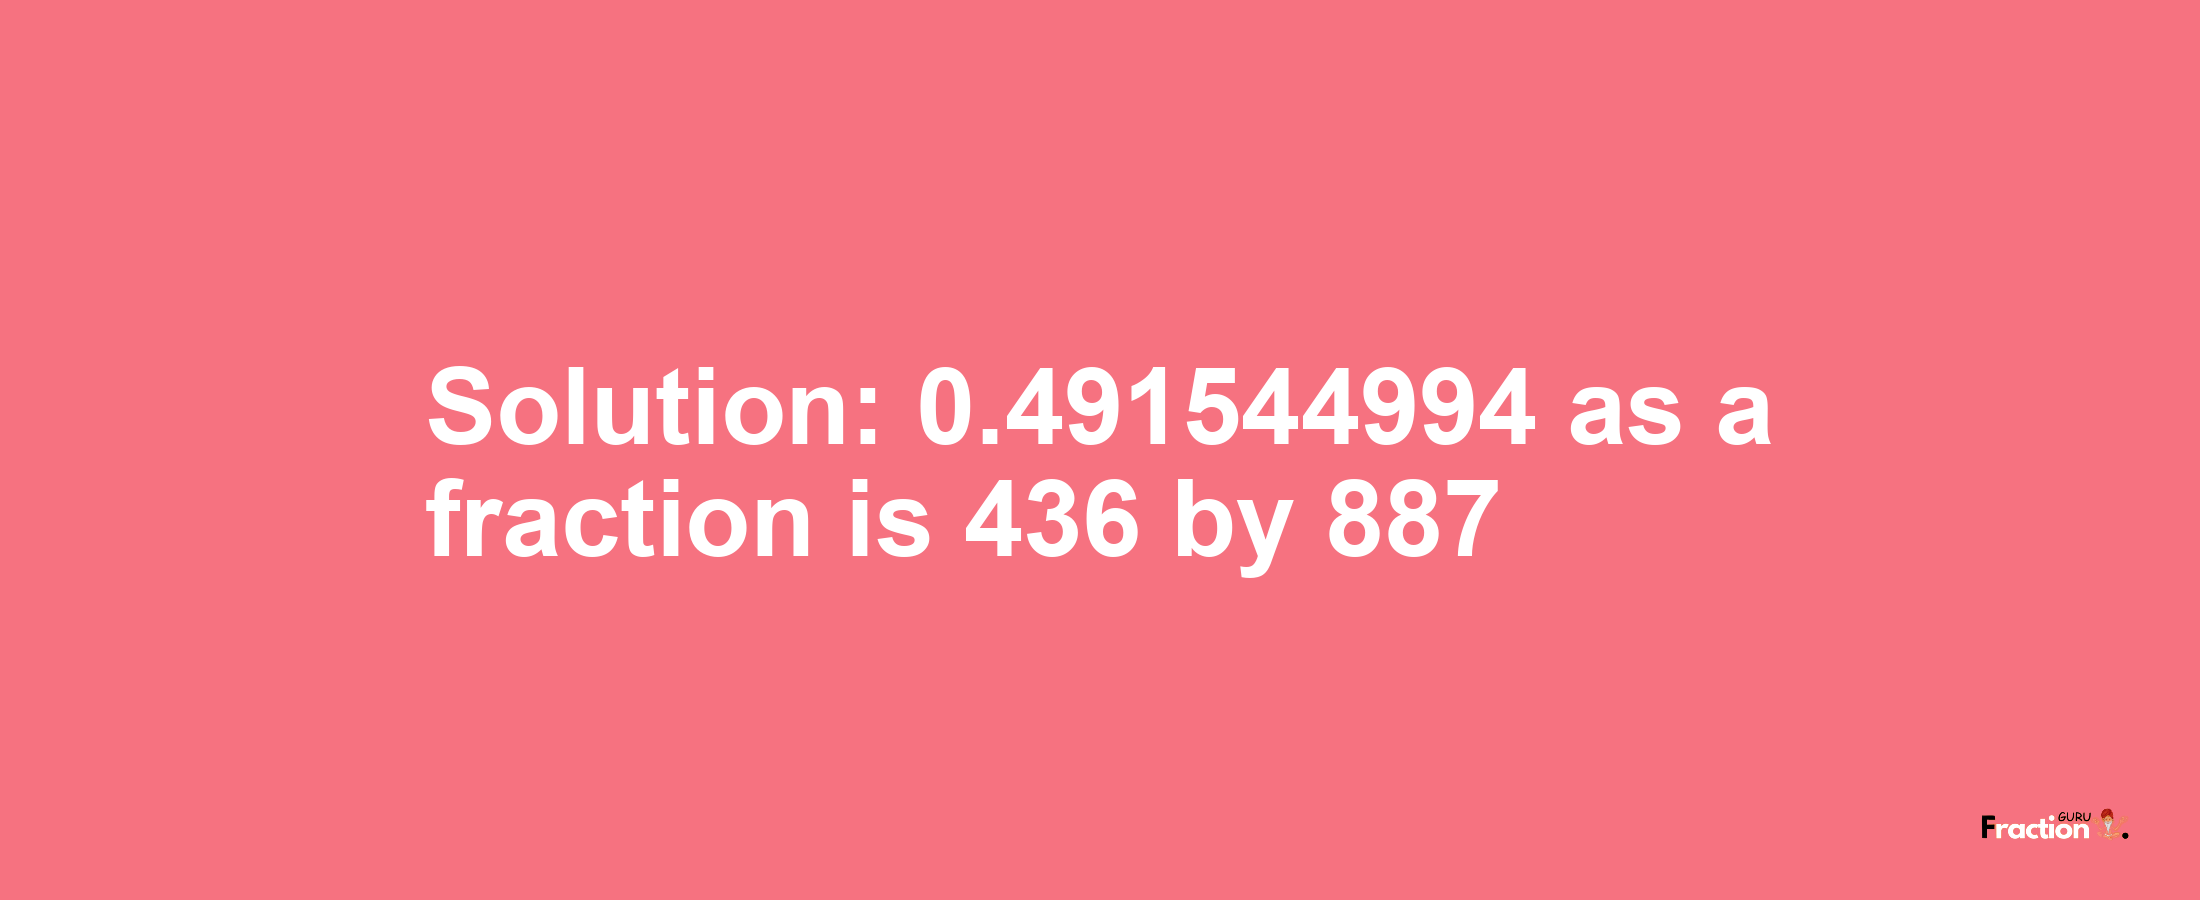 Solution:0.491544994 as a fraction is 436/887